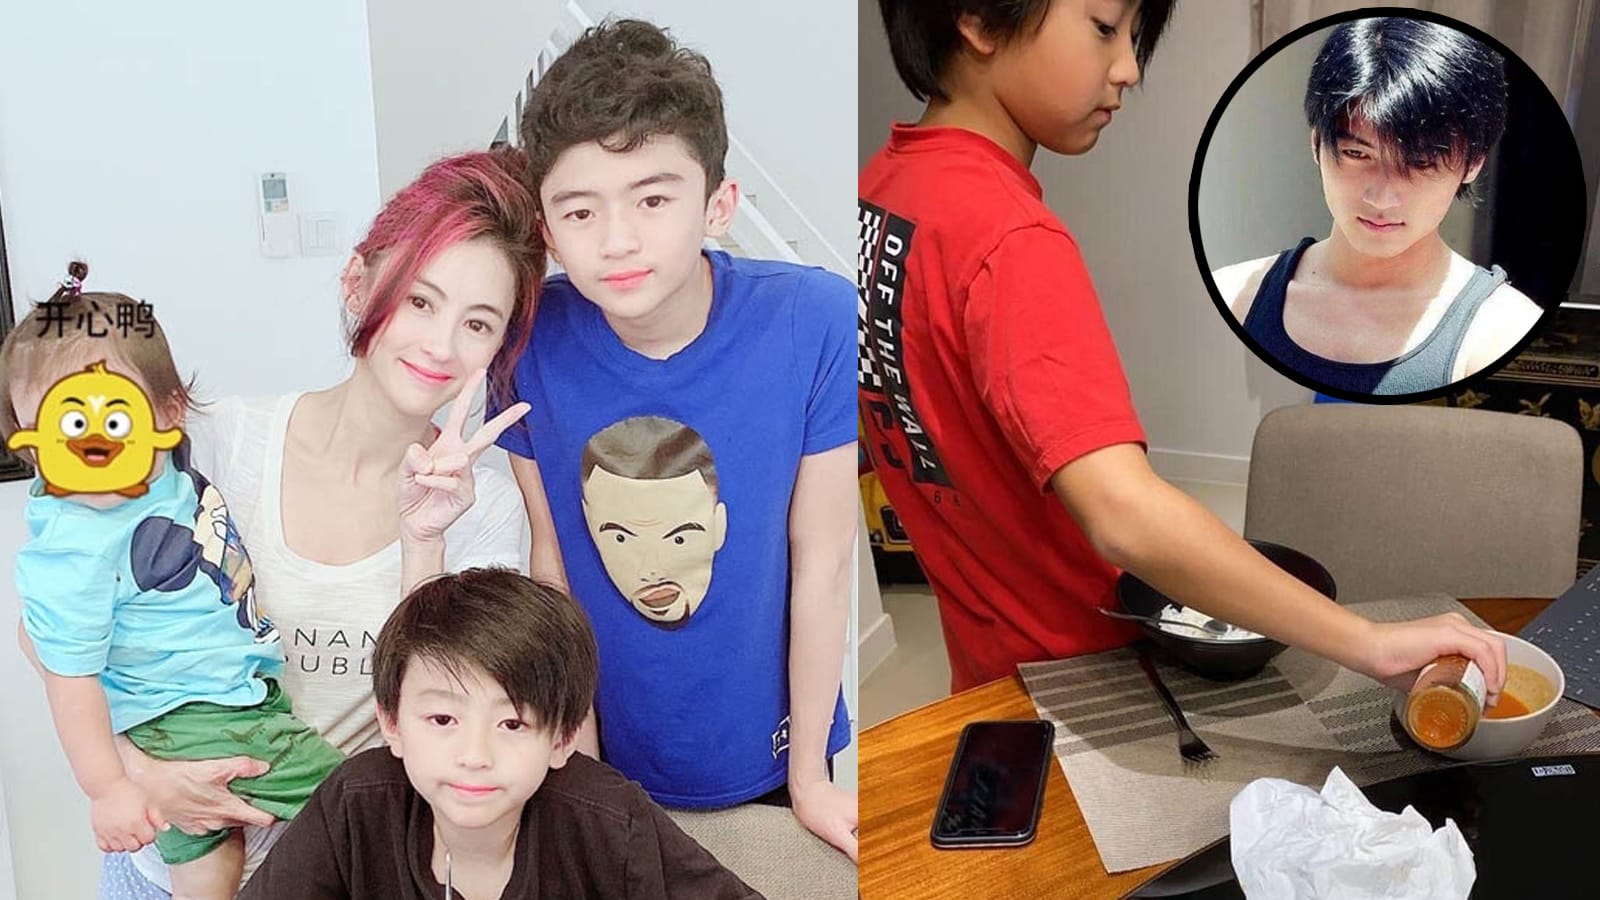 Cecilia Cheung’s 10-Year-Old Son Now Known As ‘Mini Nicholas Tse’ After She Posts Vid Of Him In The Kitchen